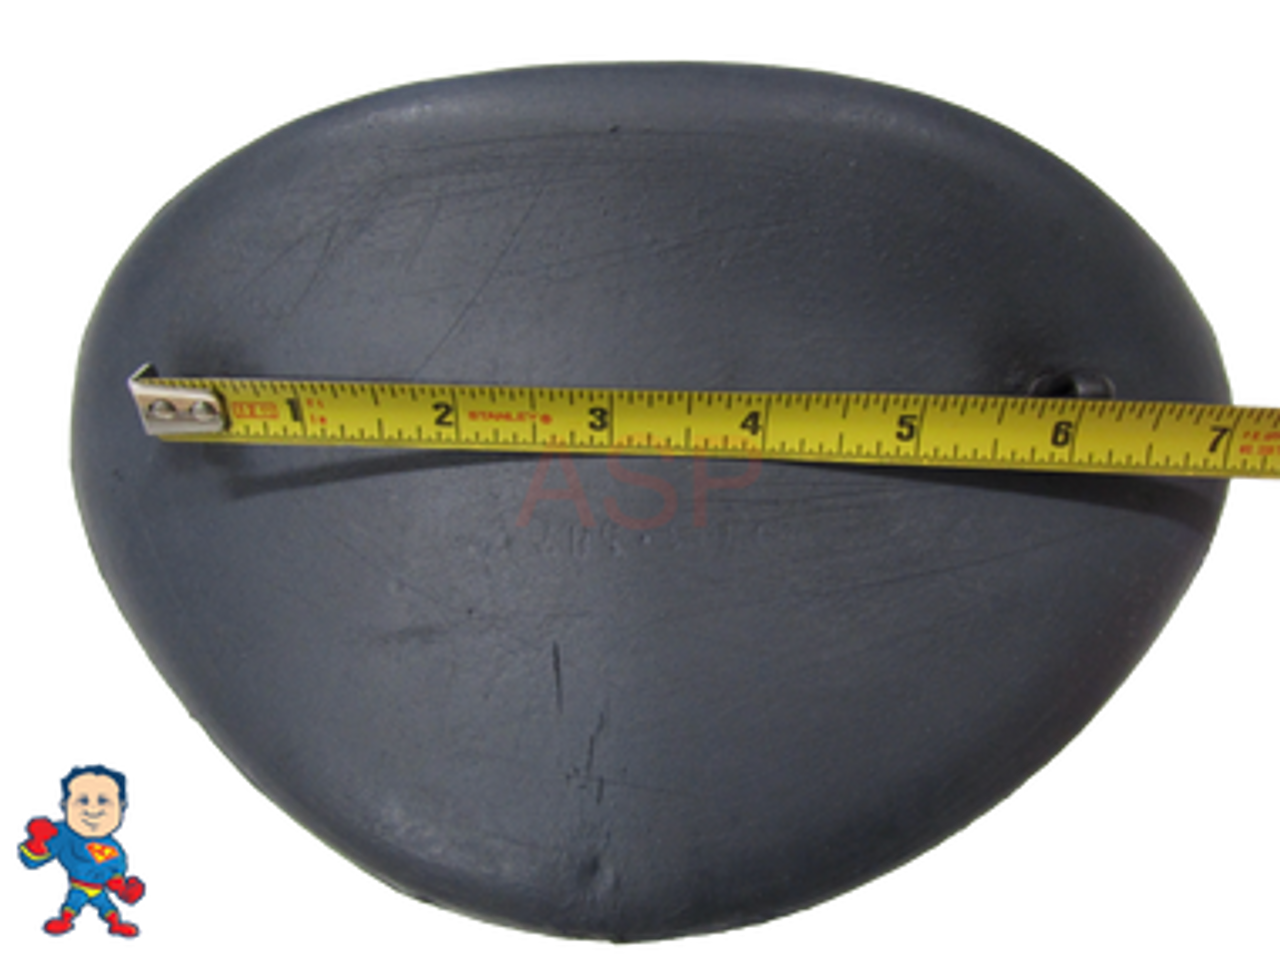 Spa Hot Tub Graphite Gray Tri-Curve Pillow (2) Tab Fits Some Four Winds Spas & Others  
Black Tri-Curve 9" wide x 6" Tall (2) Tabs that are about 6-6 1/8" center to center